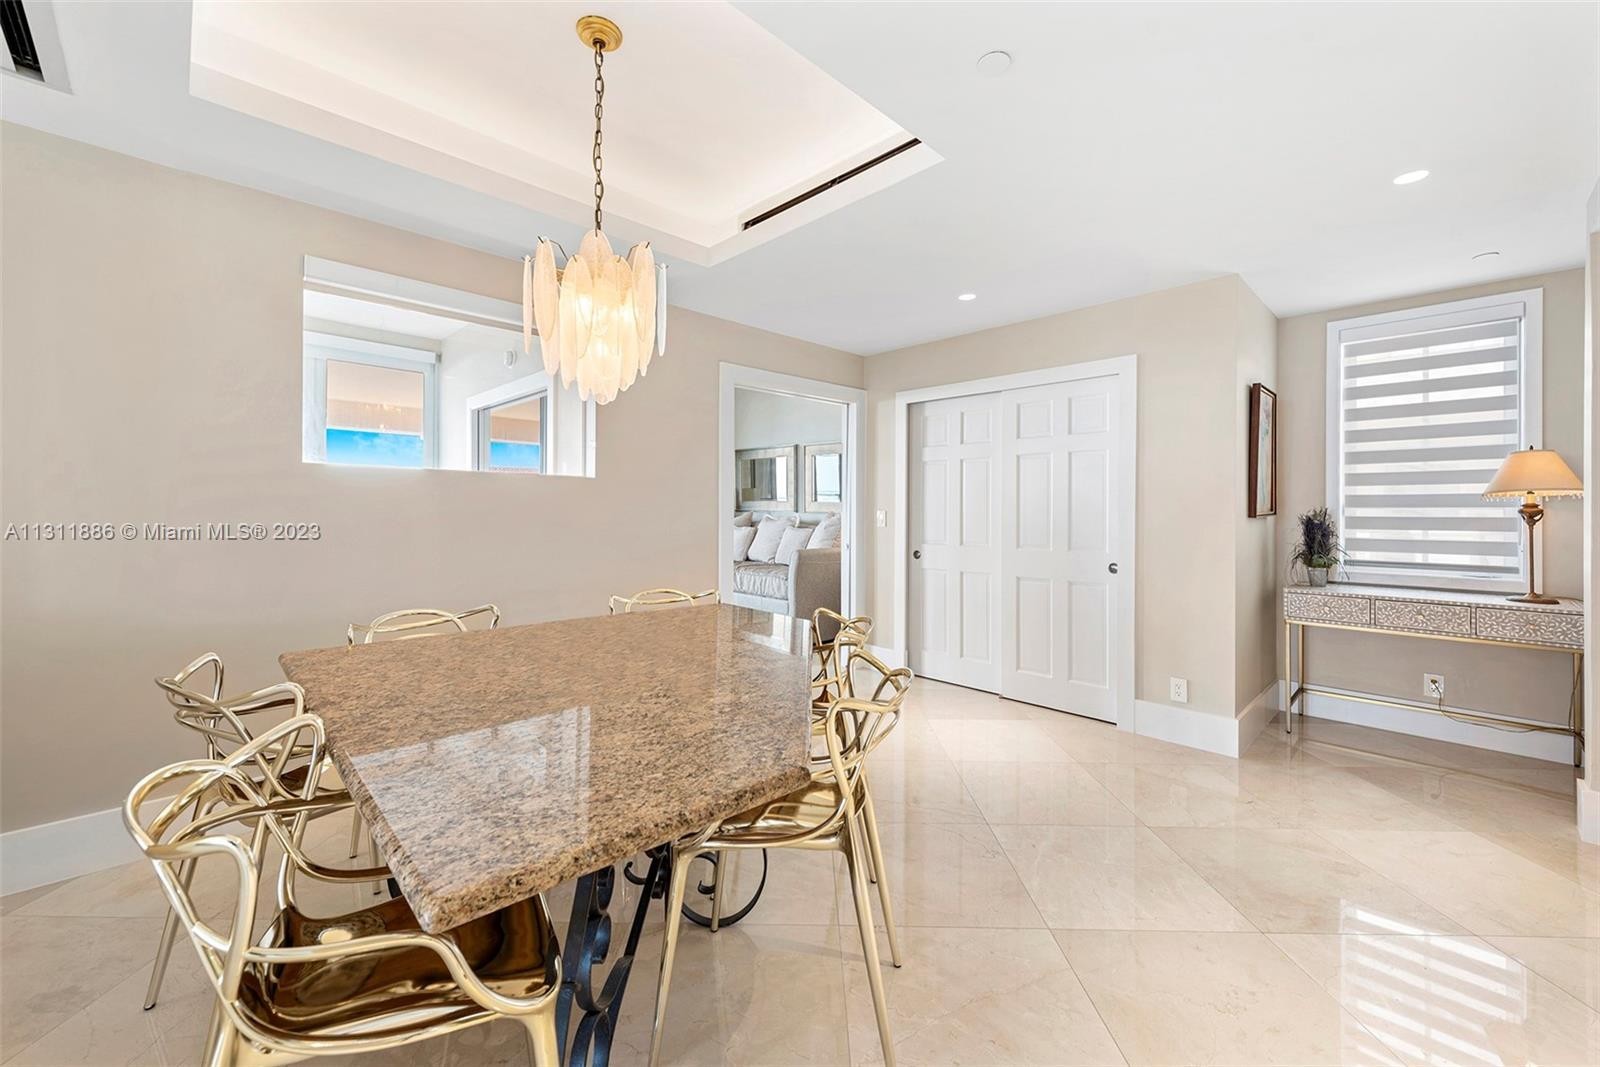 16. 19253 Fisher Island Dr